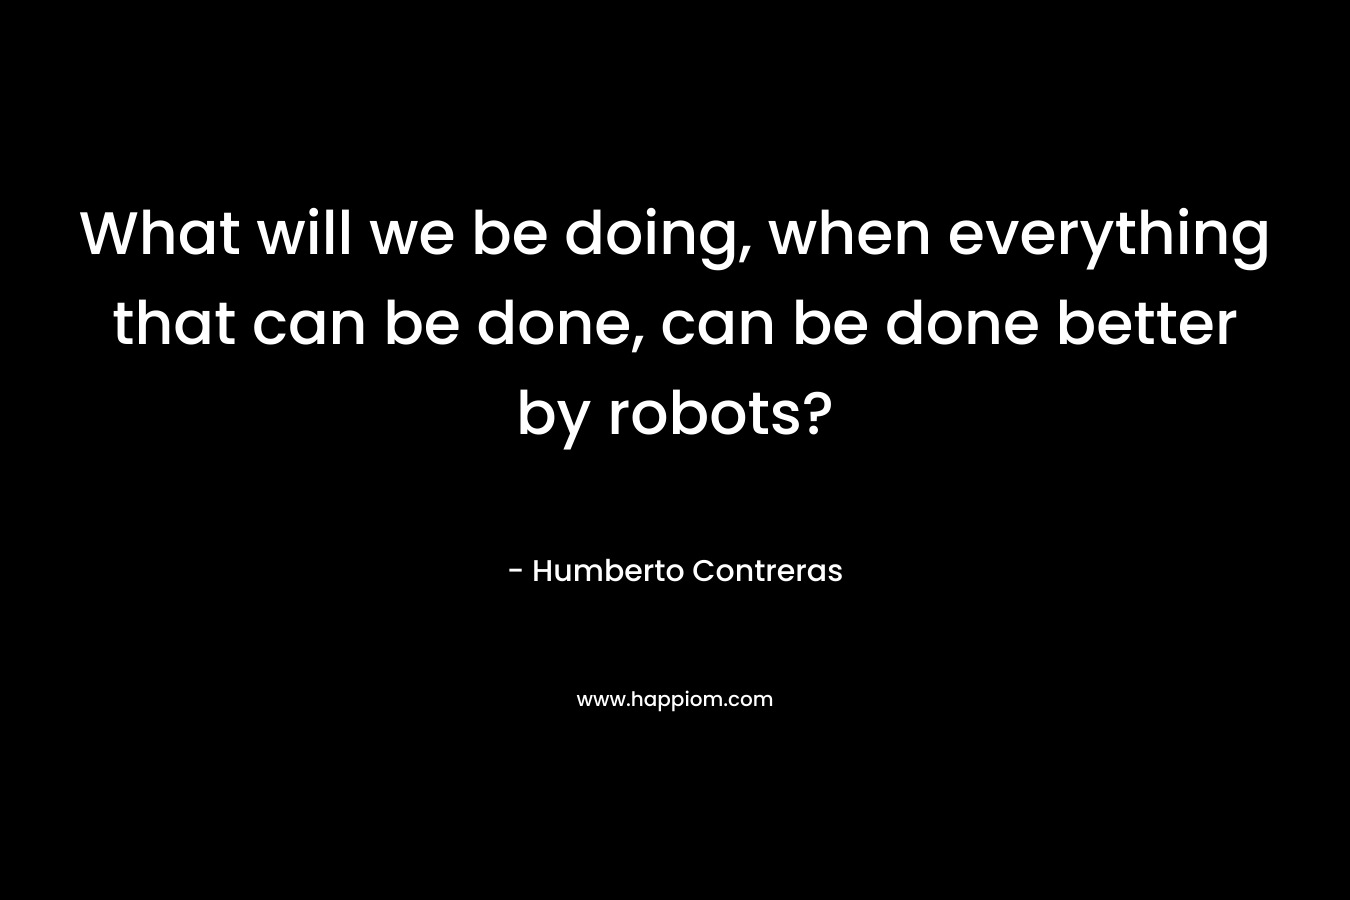 What will we be doing, when everything that can be done, can be done better by robots?